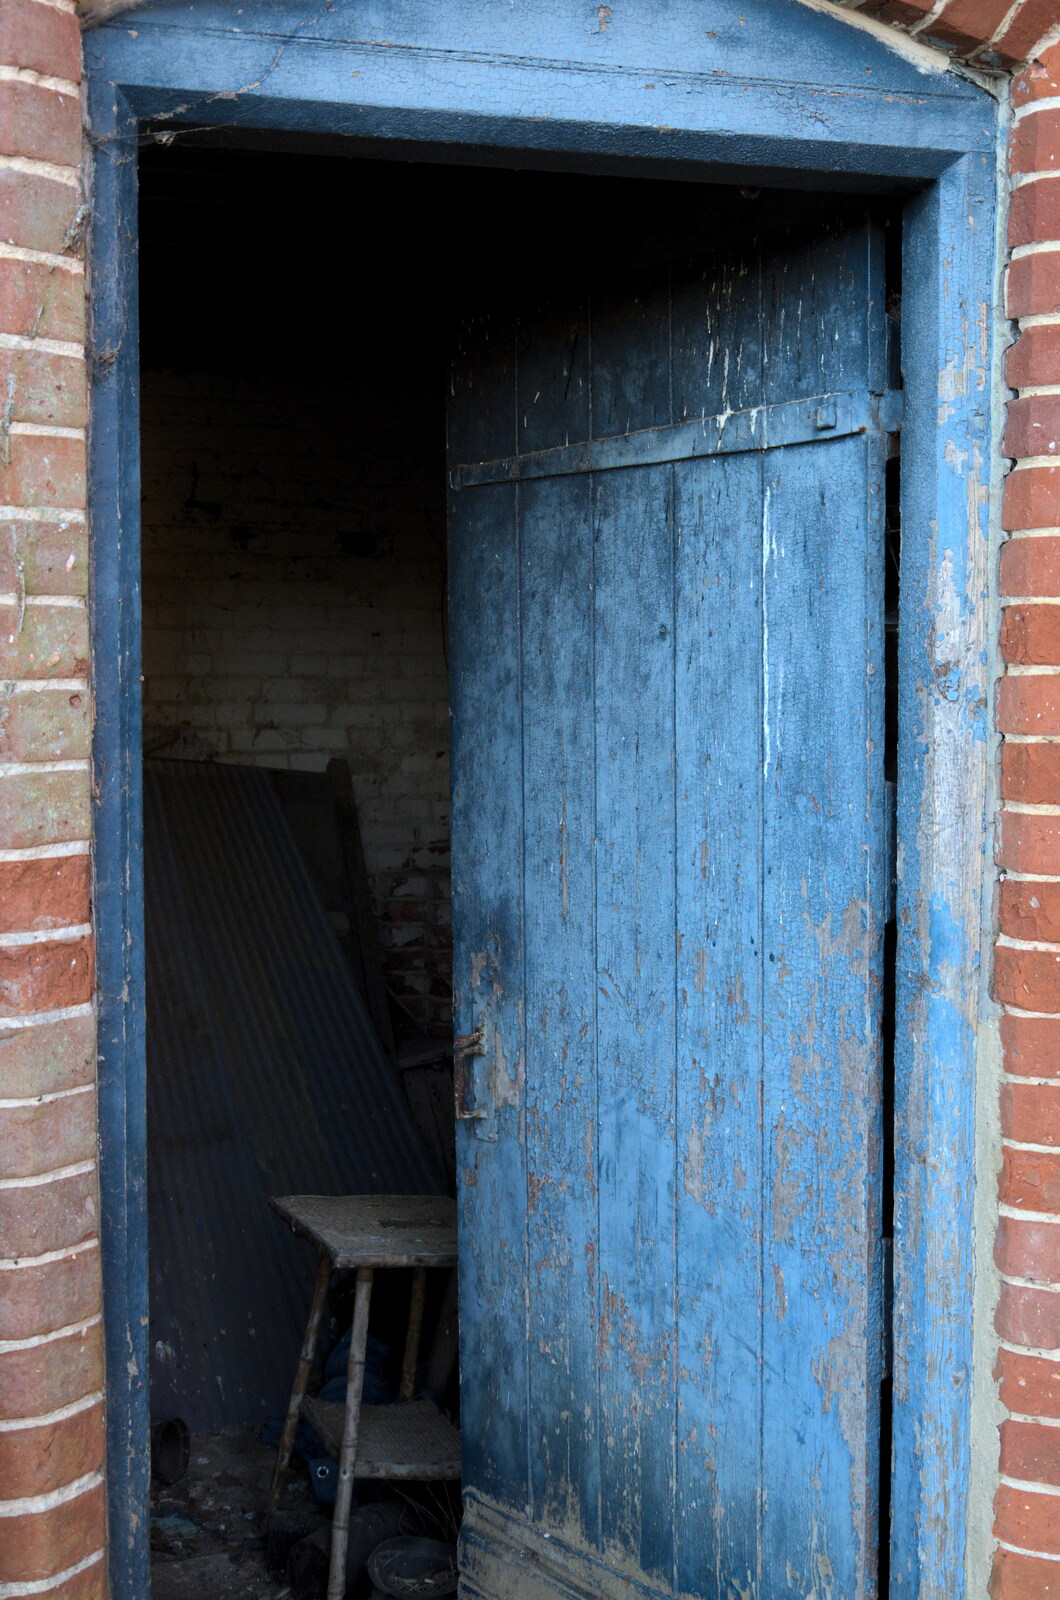 A door into the potting shed from Snowdrops at Talconeston Hall, Tacolneston, Norfolk - 7th February 2020